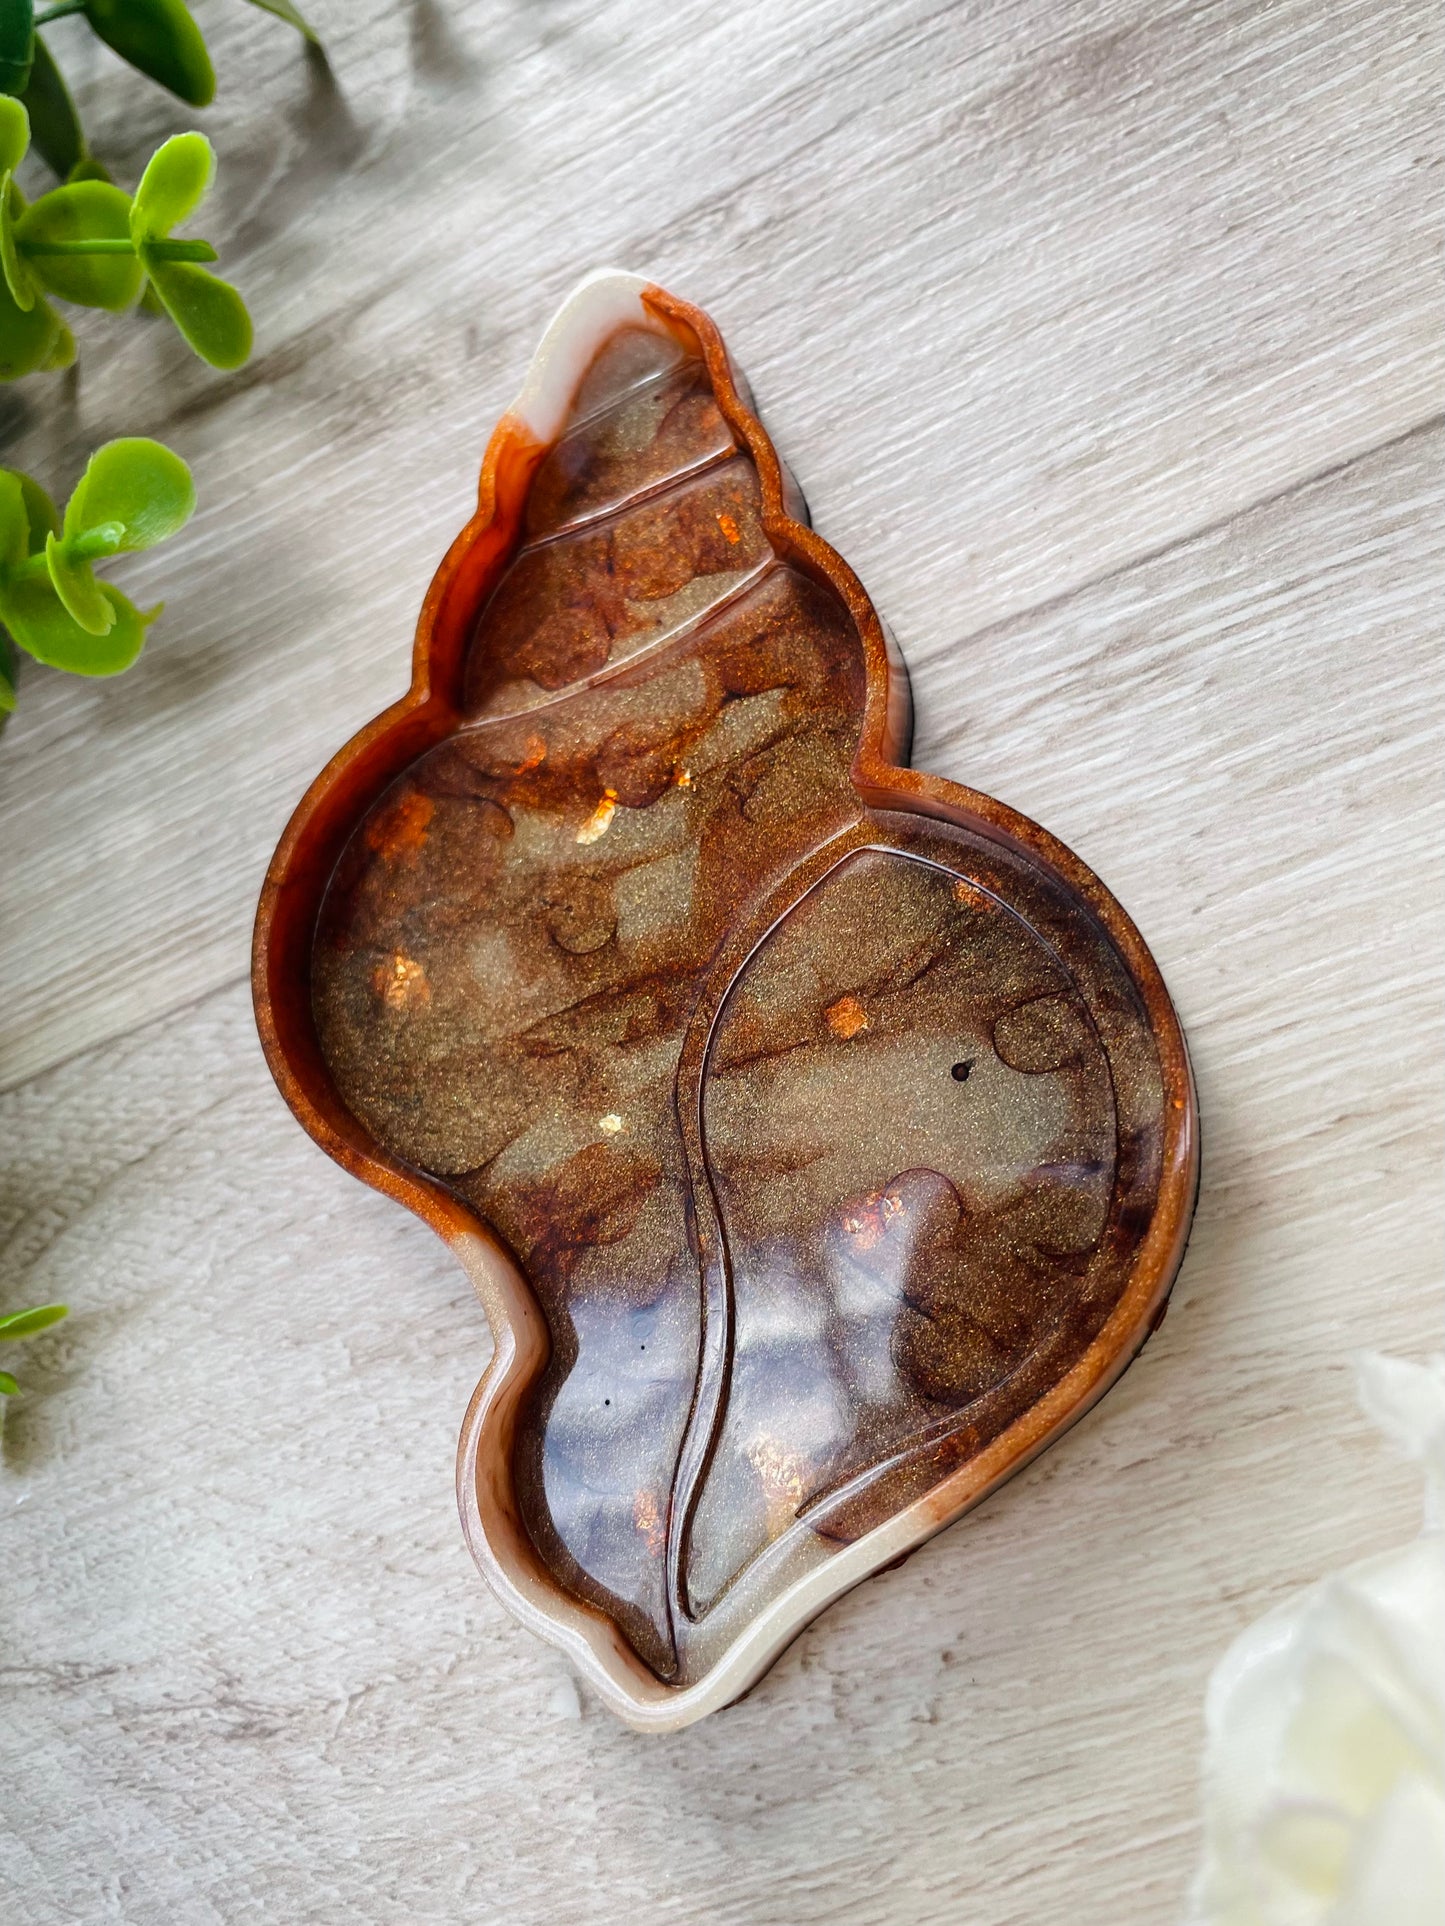 Gorgeous amber, brown & gold mini shell dish 🐚🐚  This dish also has some cream tones with gold leaf flake detailing!  Great compact size, approx 12cm x 7.5cm  x4 Rubber feet included in package as an optional addon